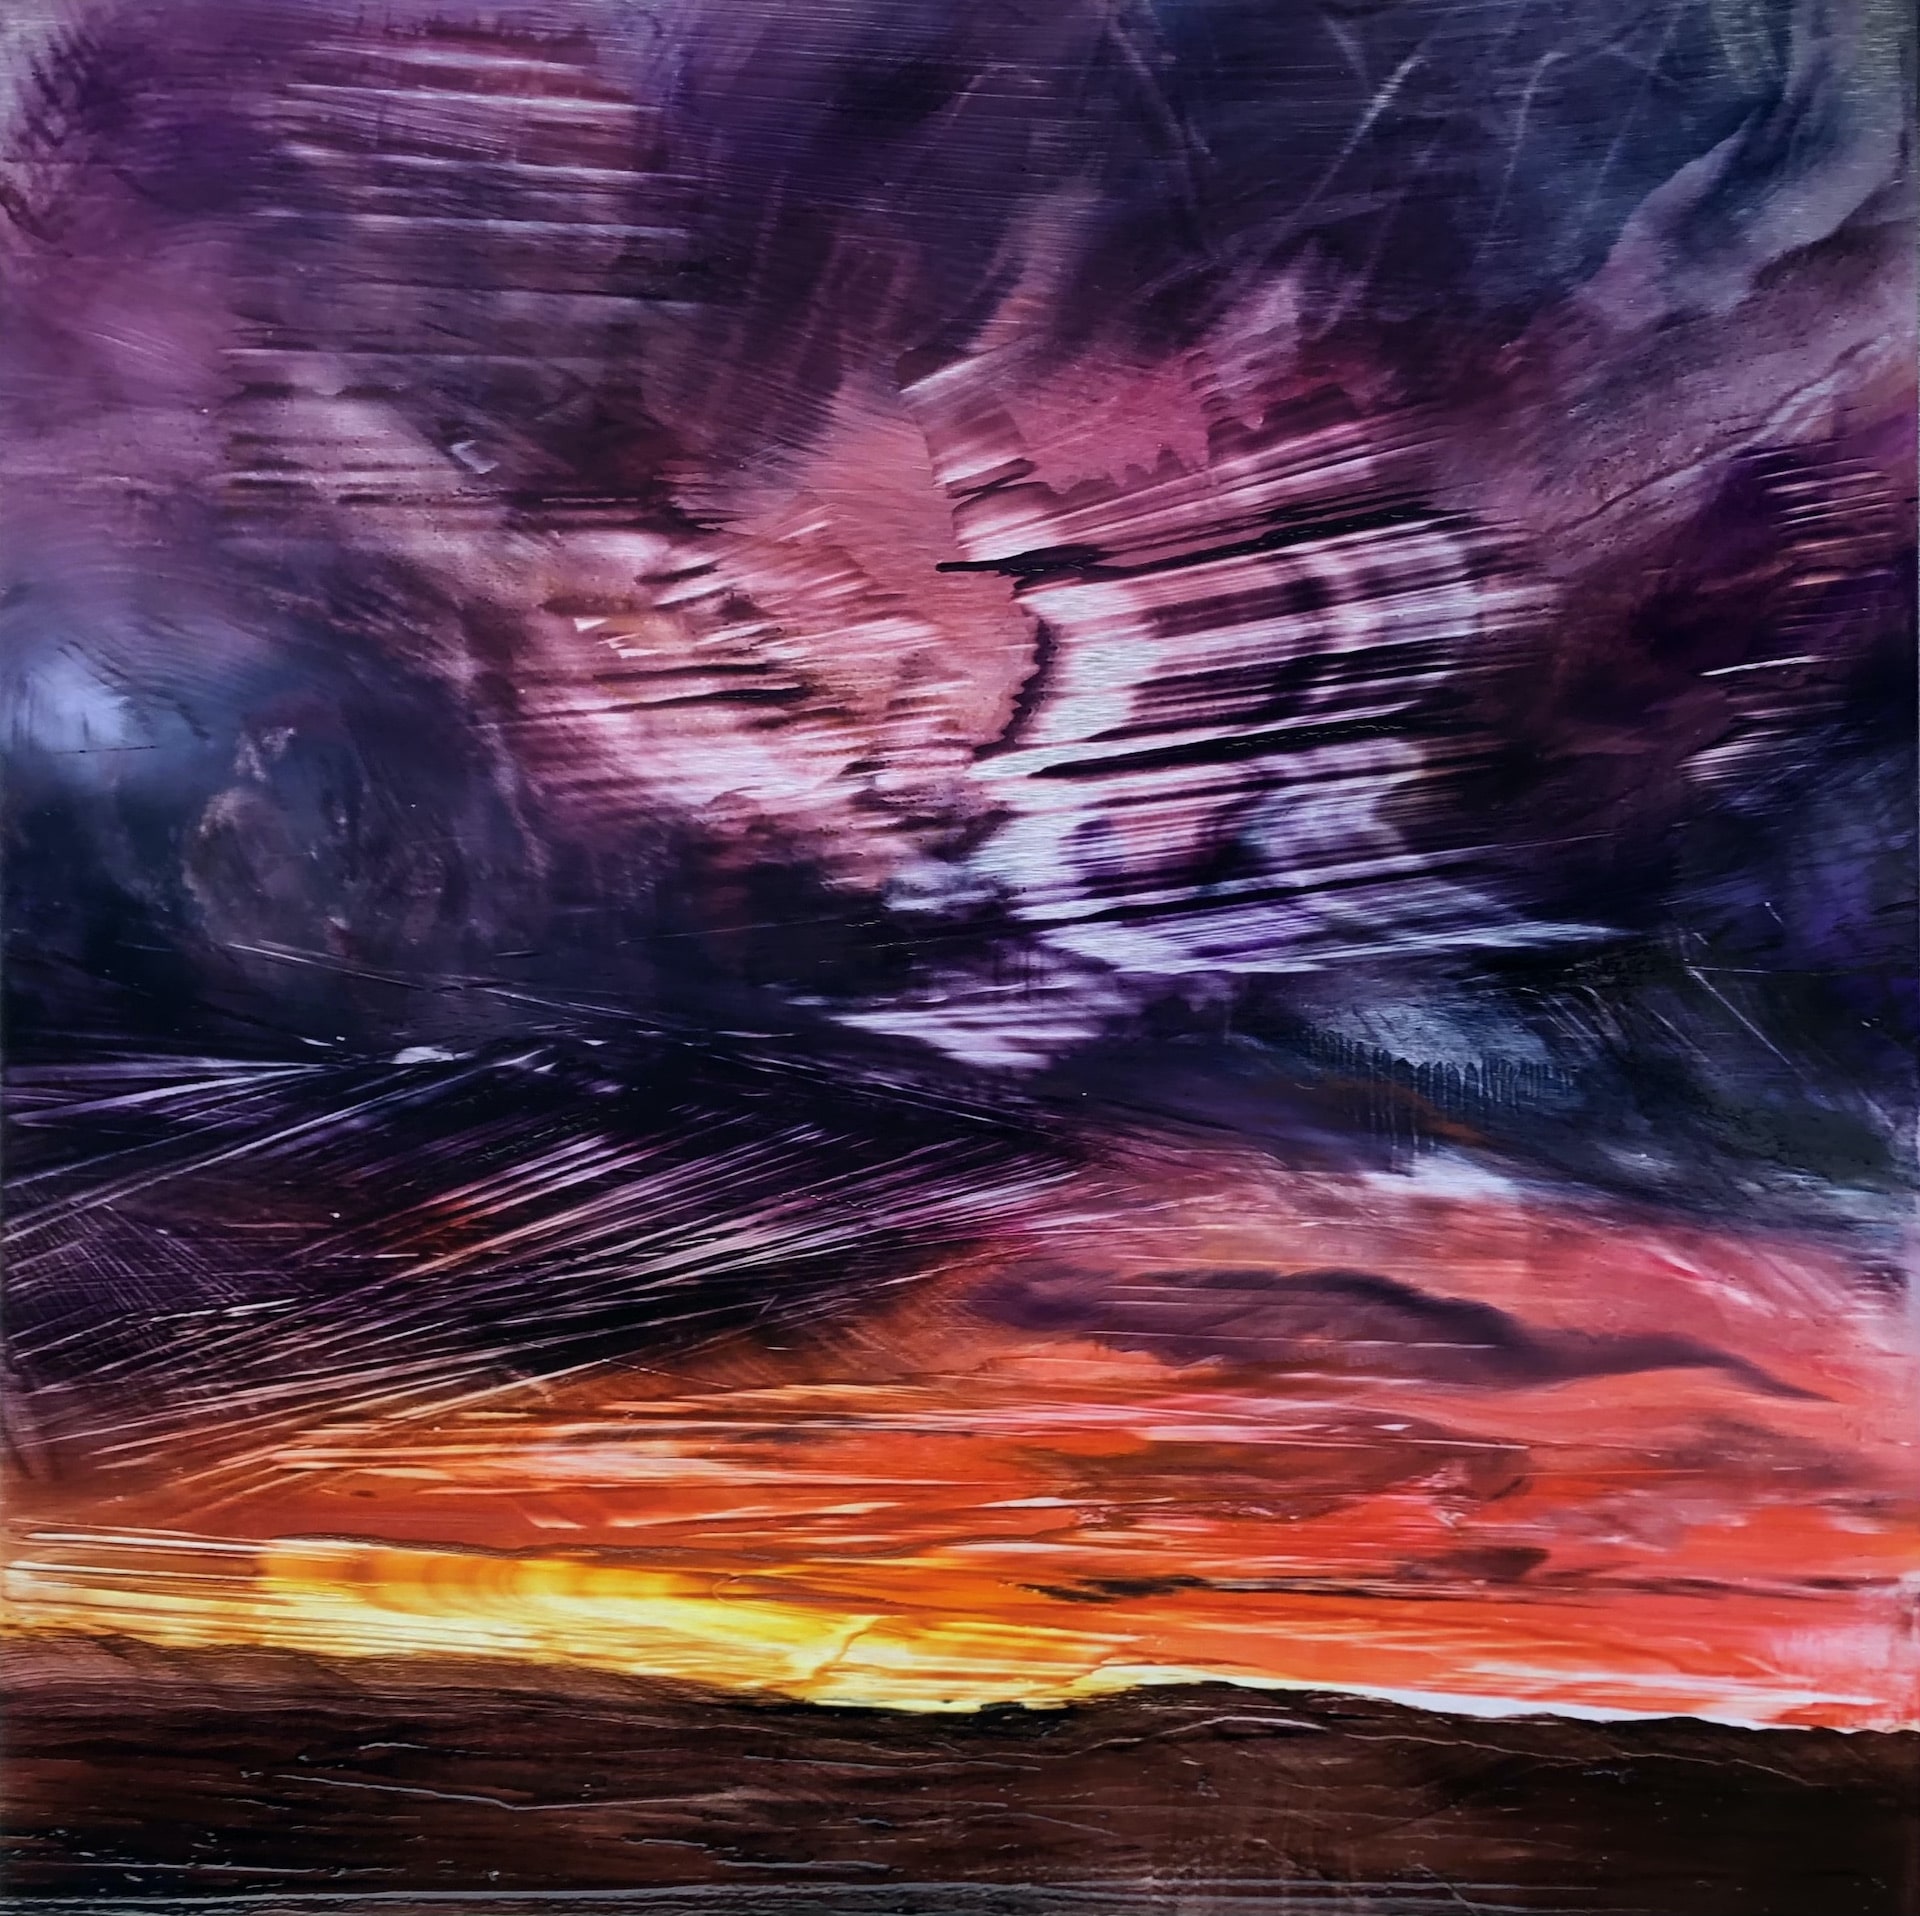 An original oil painting on metal panel by artist Cynthia McLoughlin of a flaming, dramatic sunset.